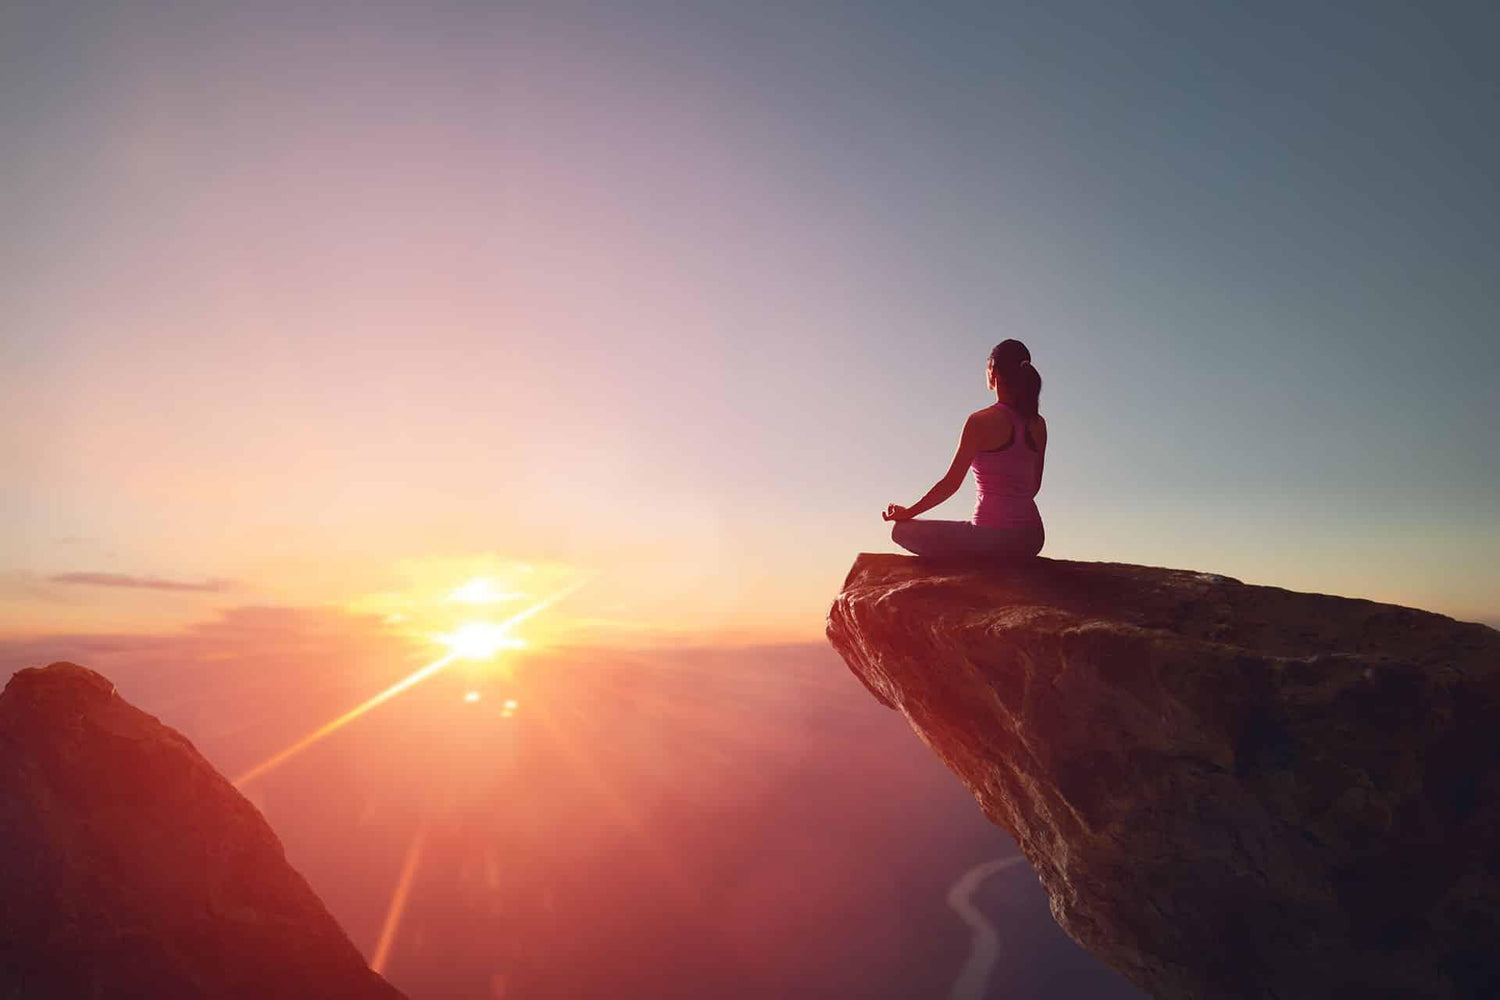 Wide angle view of woman practicing yoga meditation on a cliff with sunset